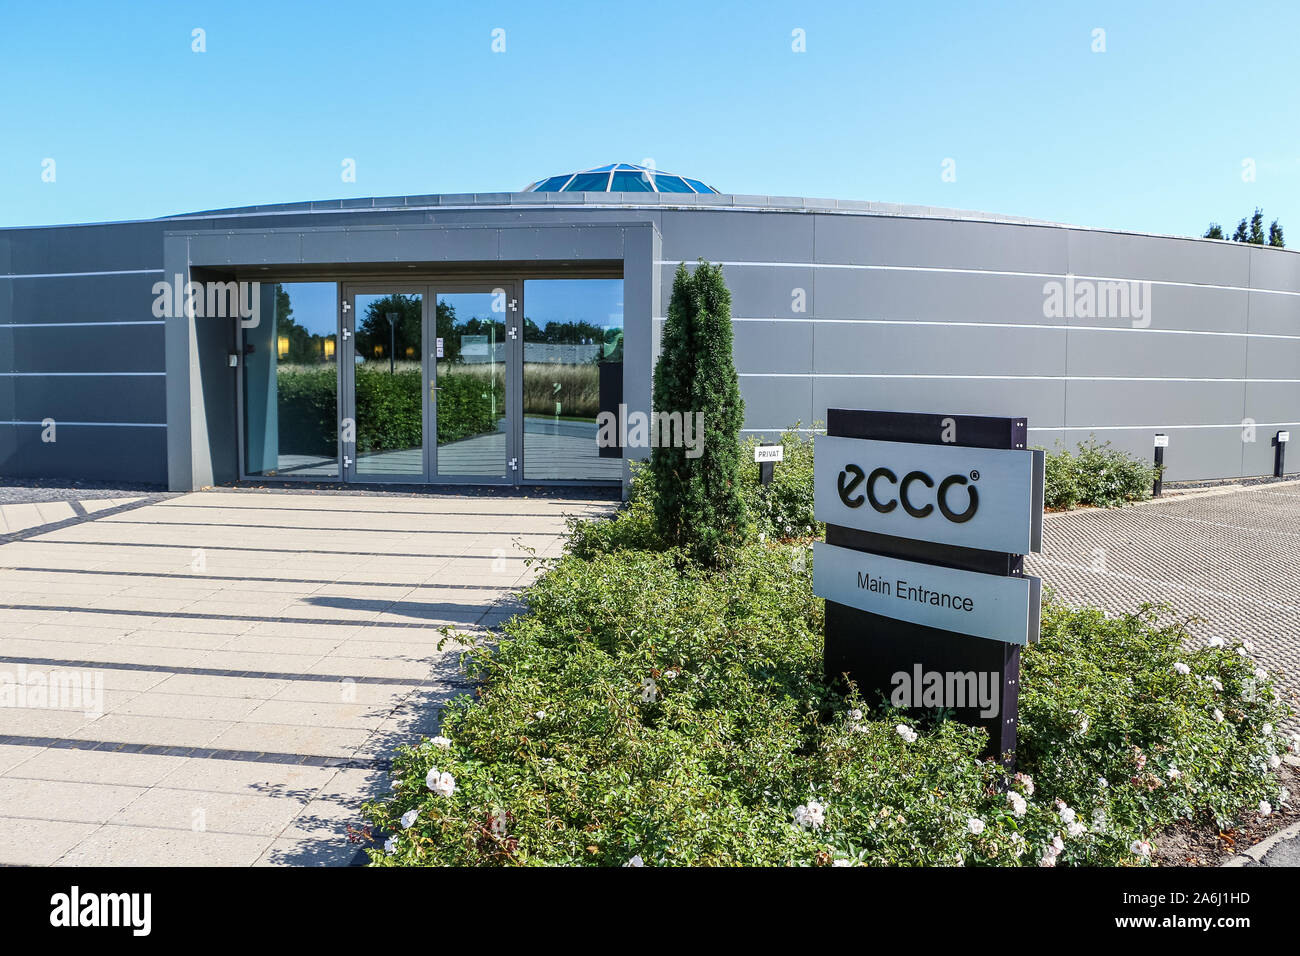 ECCO Sko a Danish shoe manufacturer and retailer head office is seen in Bredebro, Denmark on 26 July 2019 ECCOÕs products are sold in 99 countries from over 2,250 ECCO shops